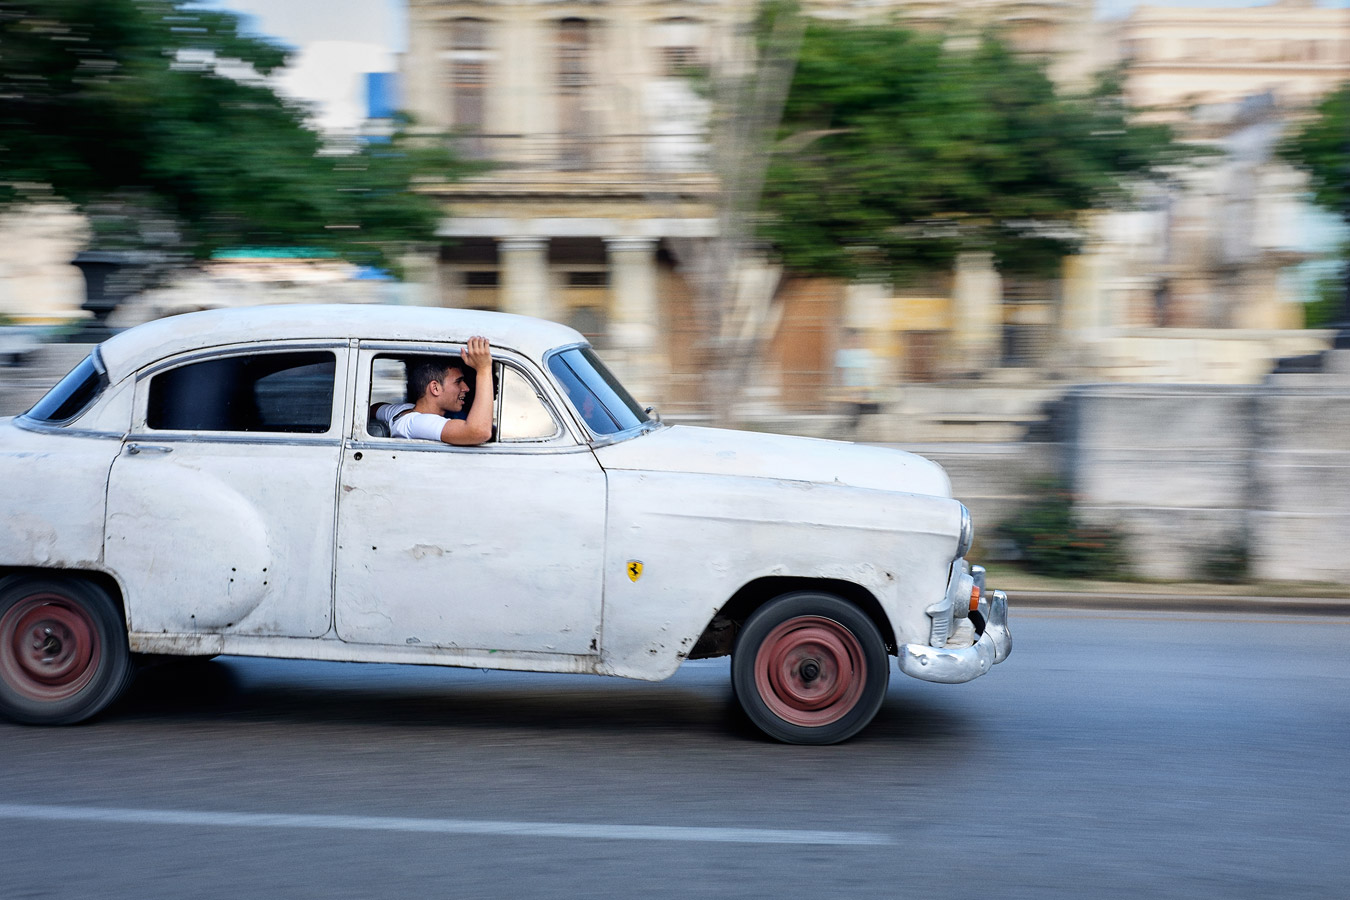 Cuba travel photography by Sharon Blance, Melbourne photographer